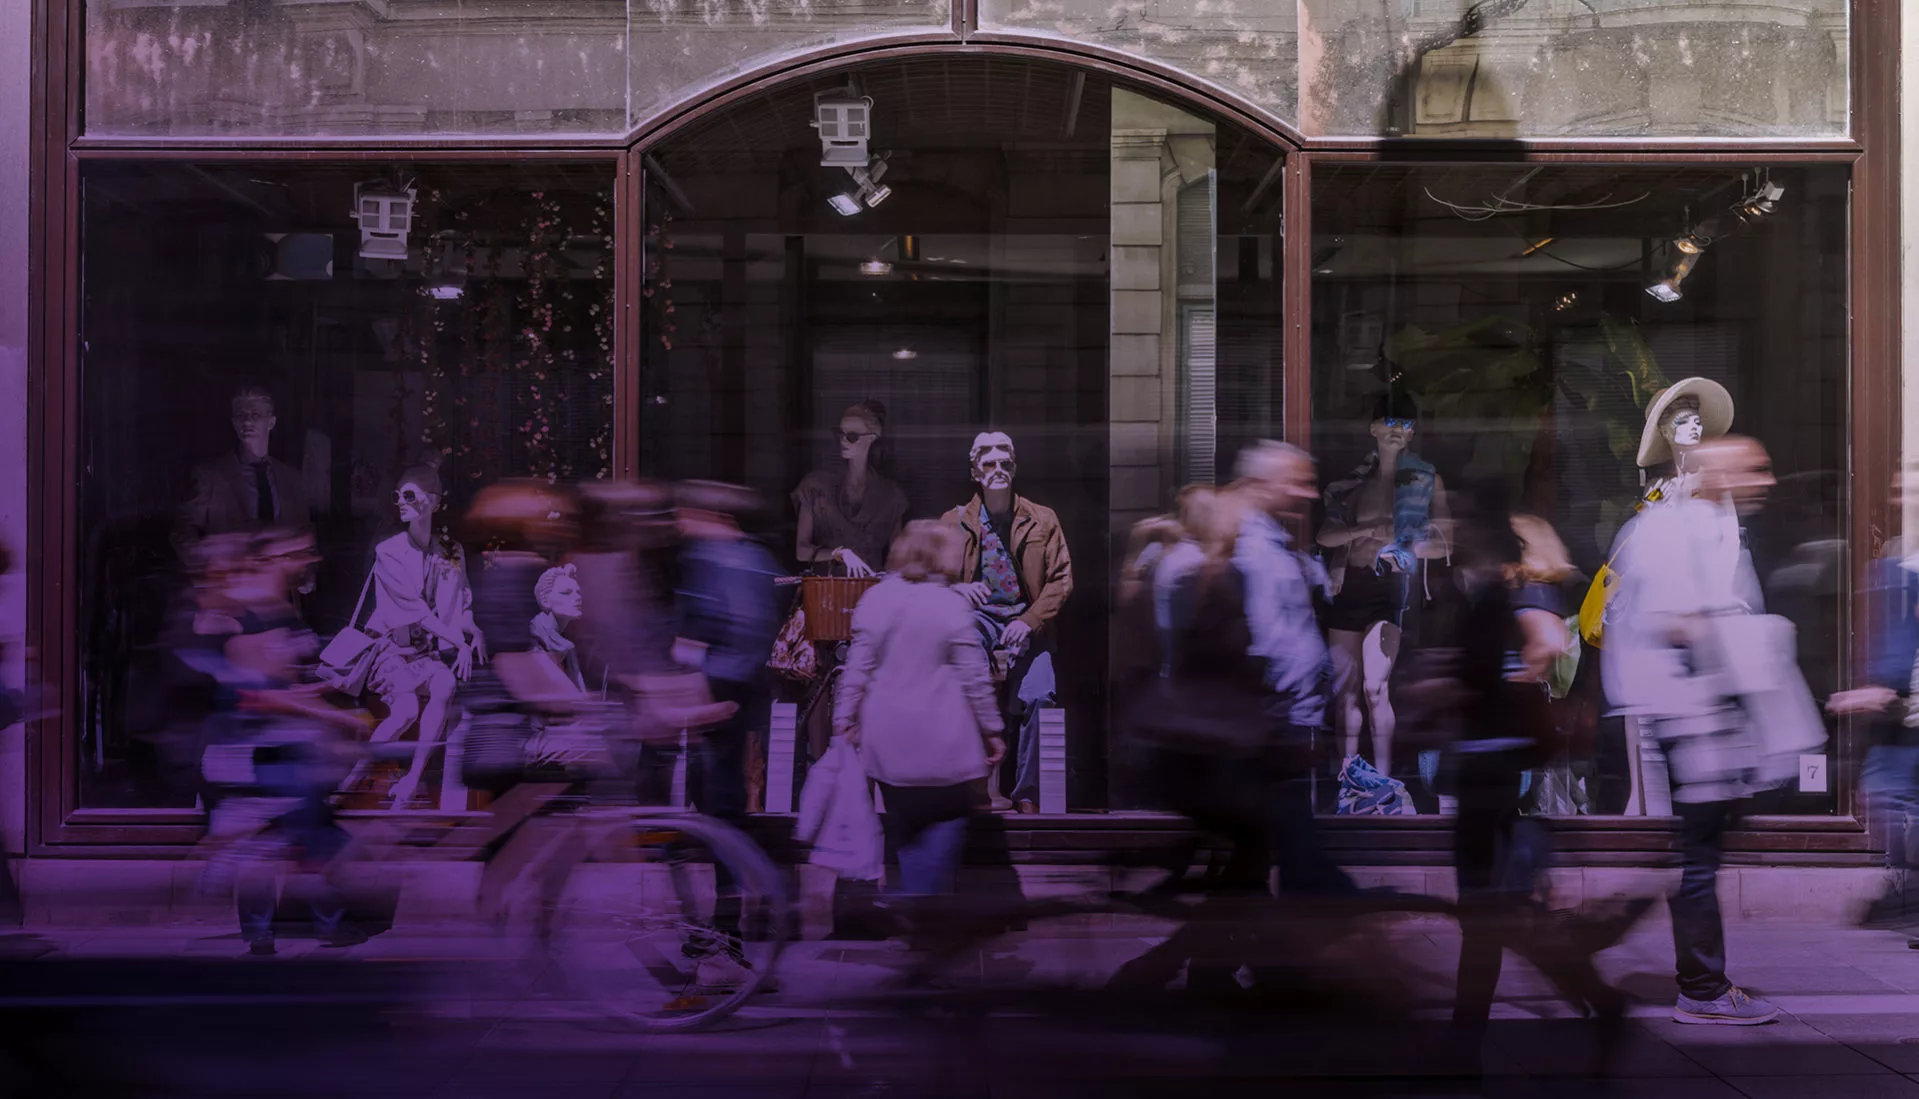 Blurred image of people walking by a storefront